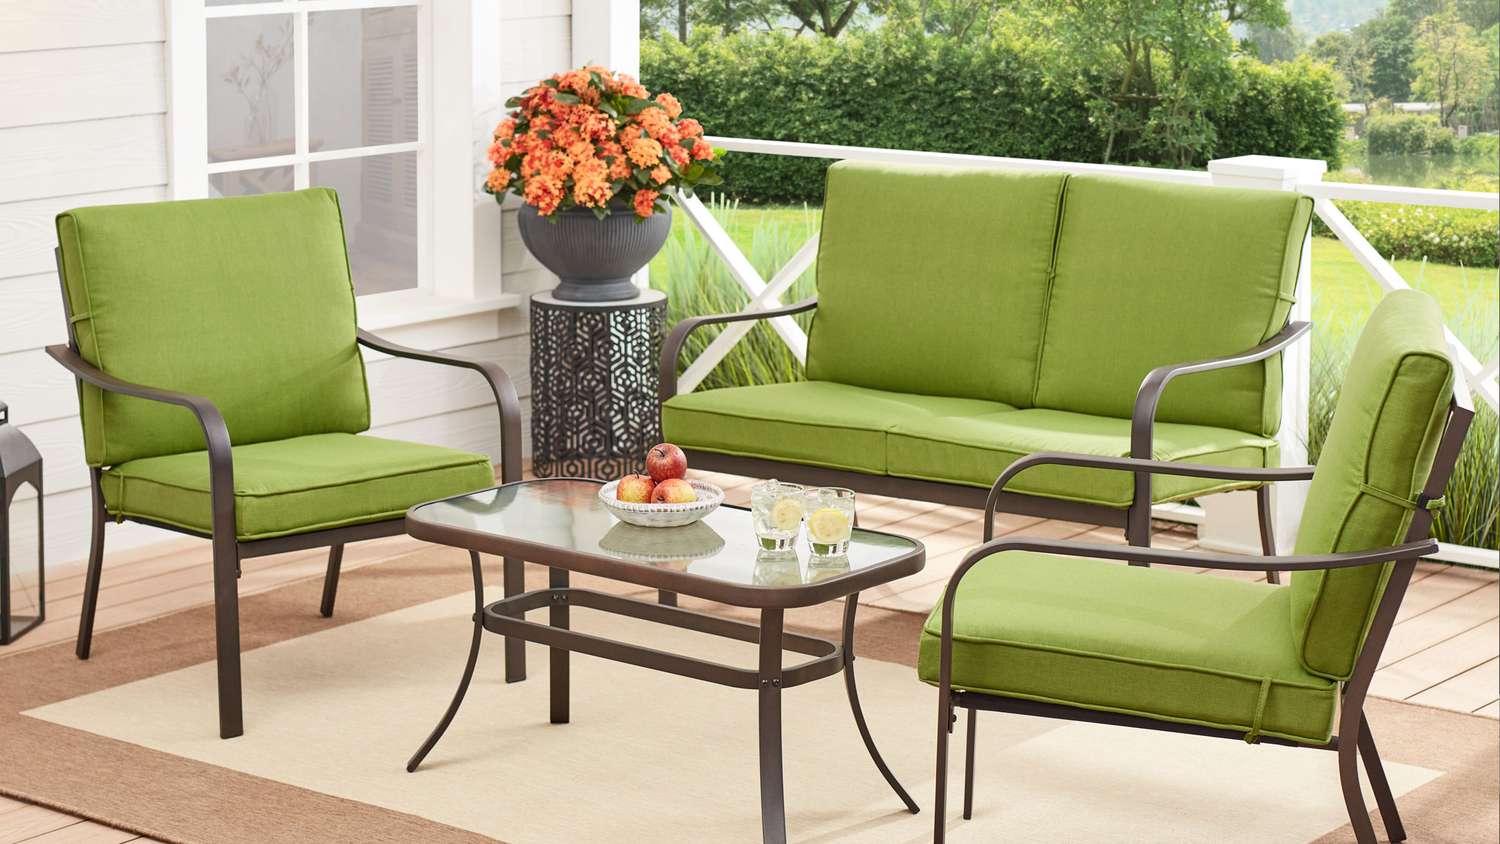 This 4-Piece Outdoor Patio Set Is Less Than $250 at Walmart | Real Simple